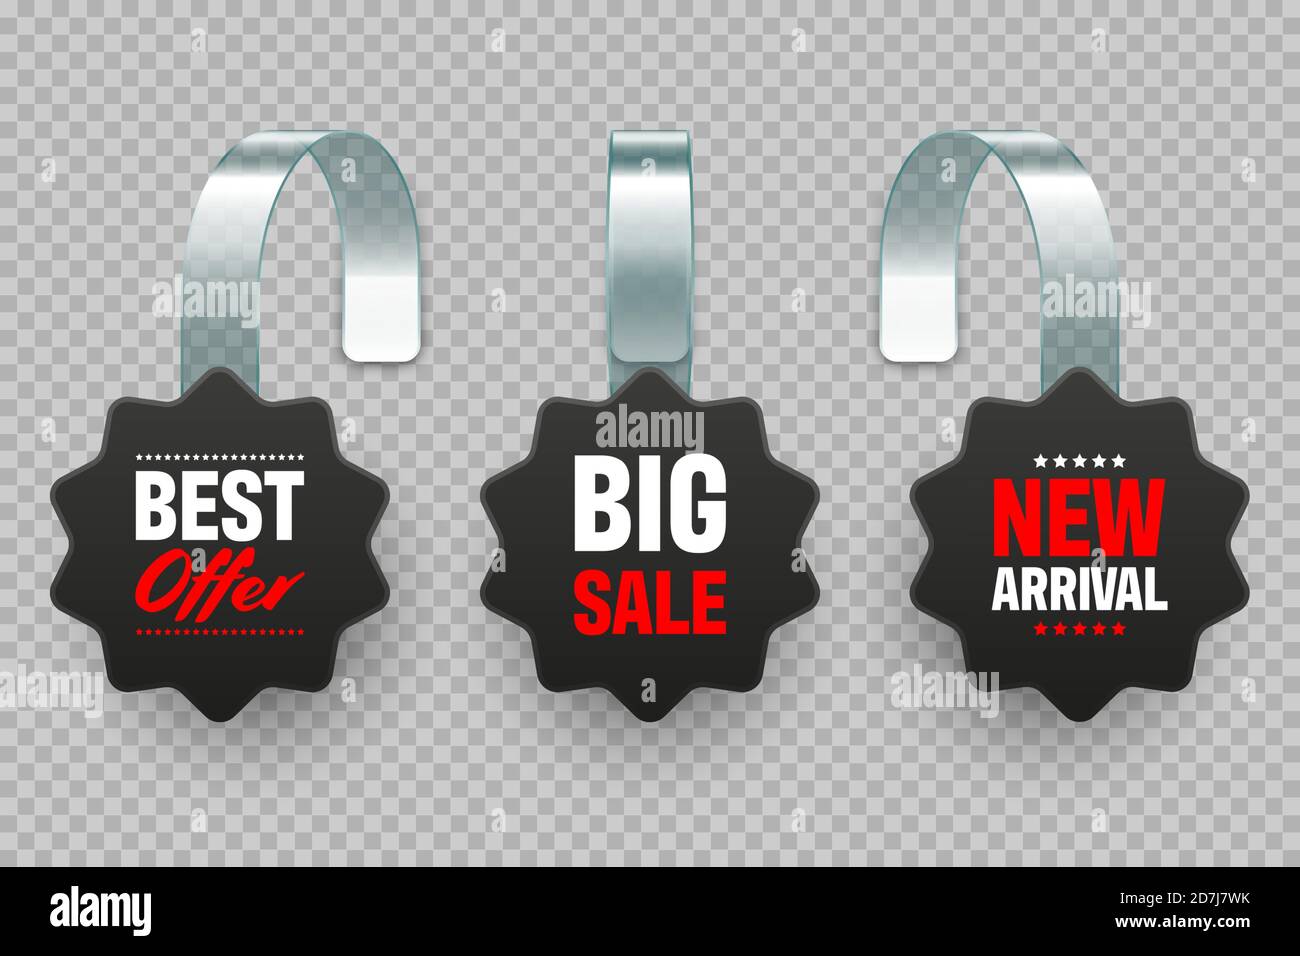 Supermarket promotional wobblers with ad text. Realistic vector